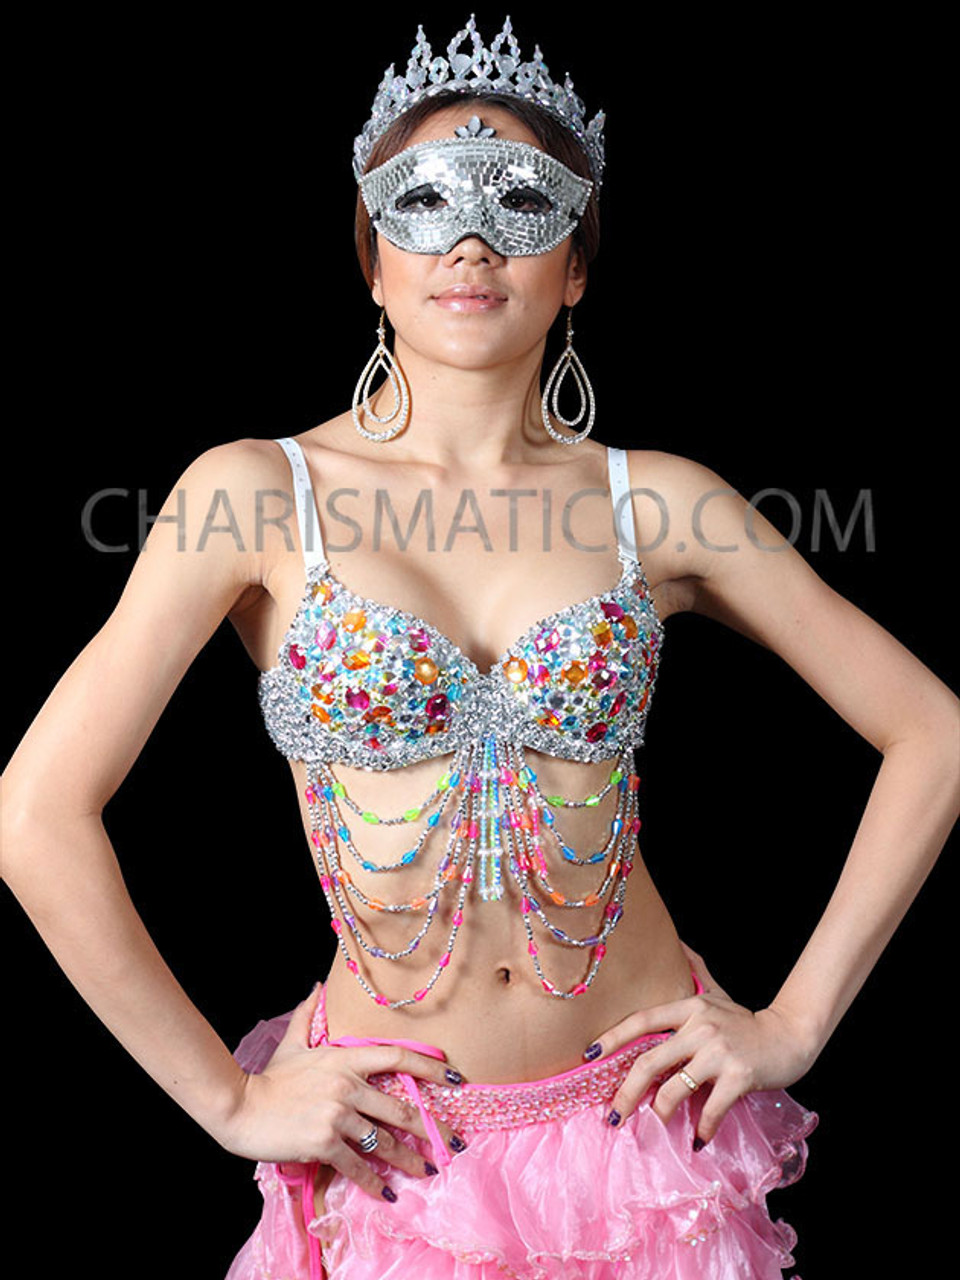 Sequin Cabaret Dance Costume Bra with Beaded Accents - HOT PINK / FUCHSIA